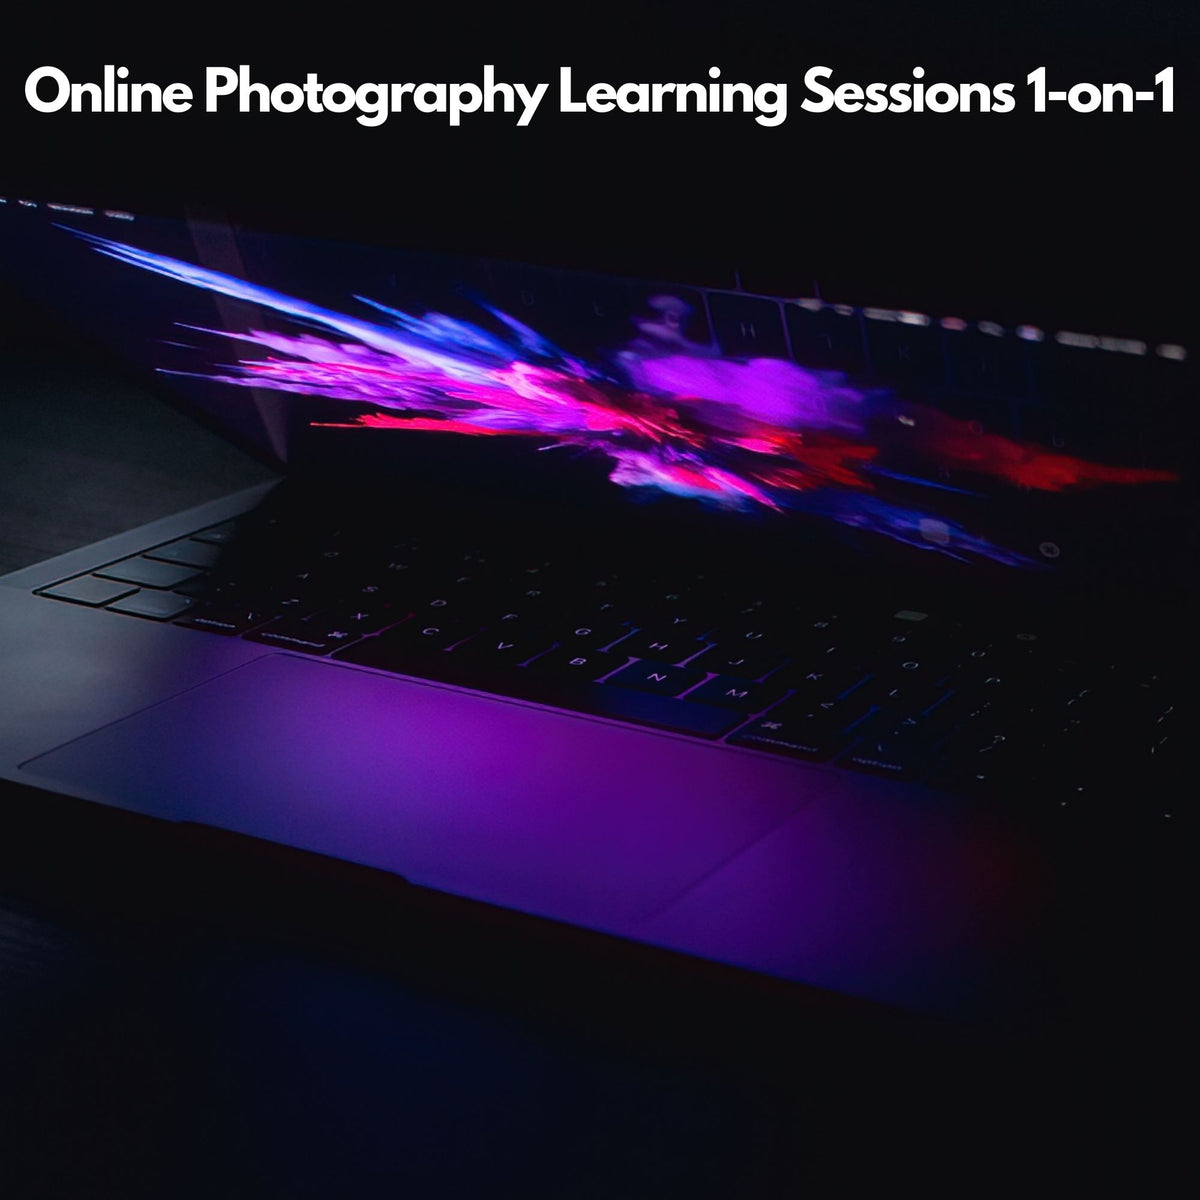 Learn Photography Online 1-on-1 Sessions with Bruno